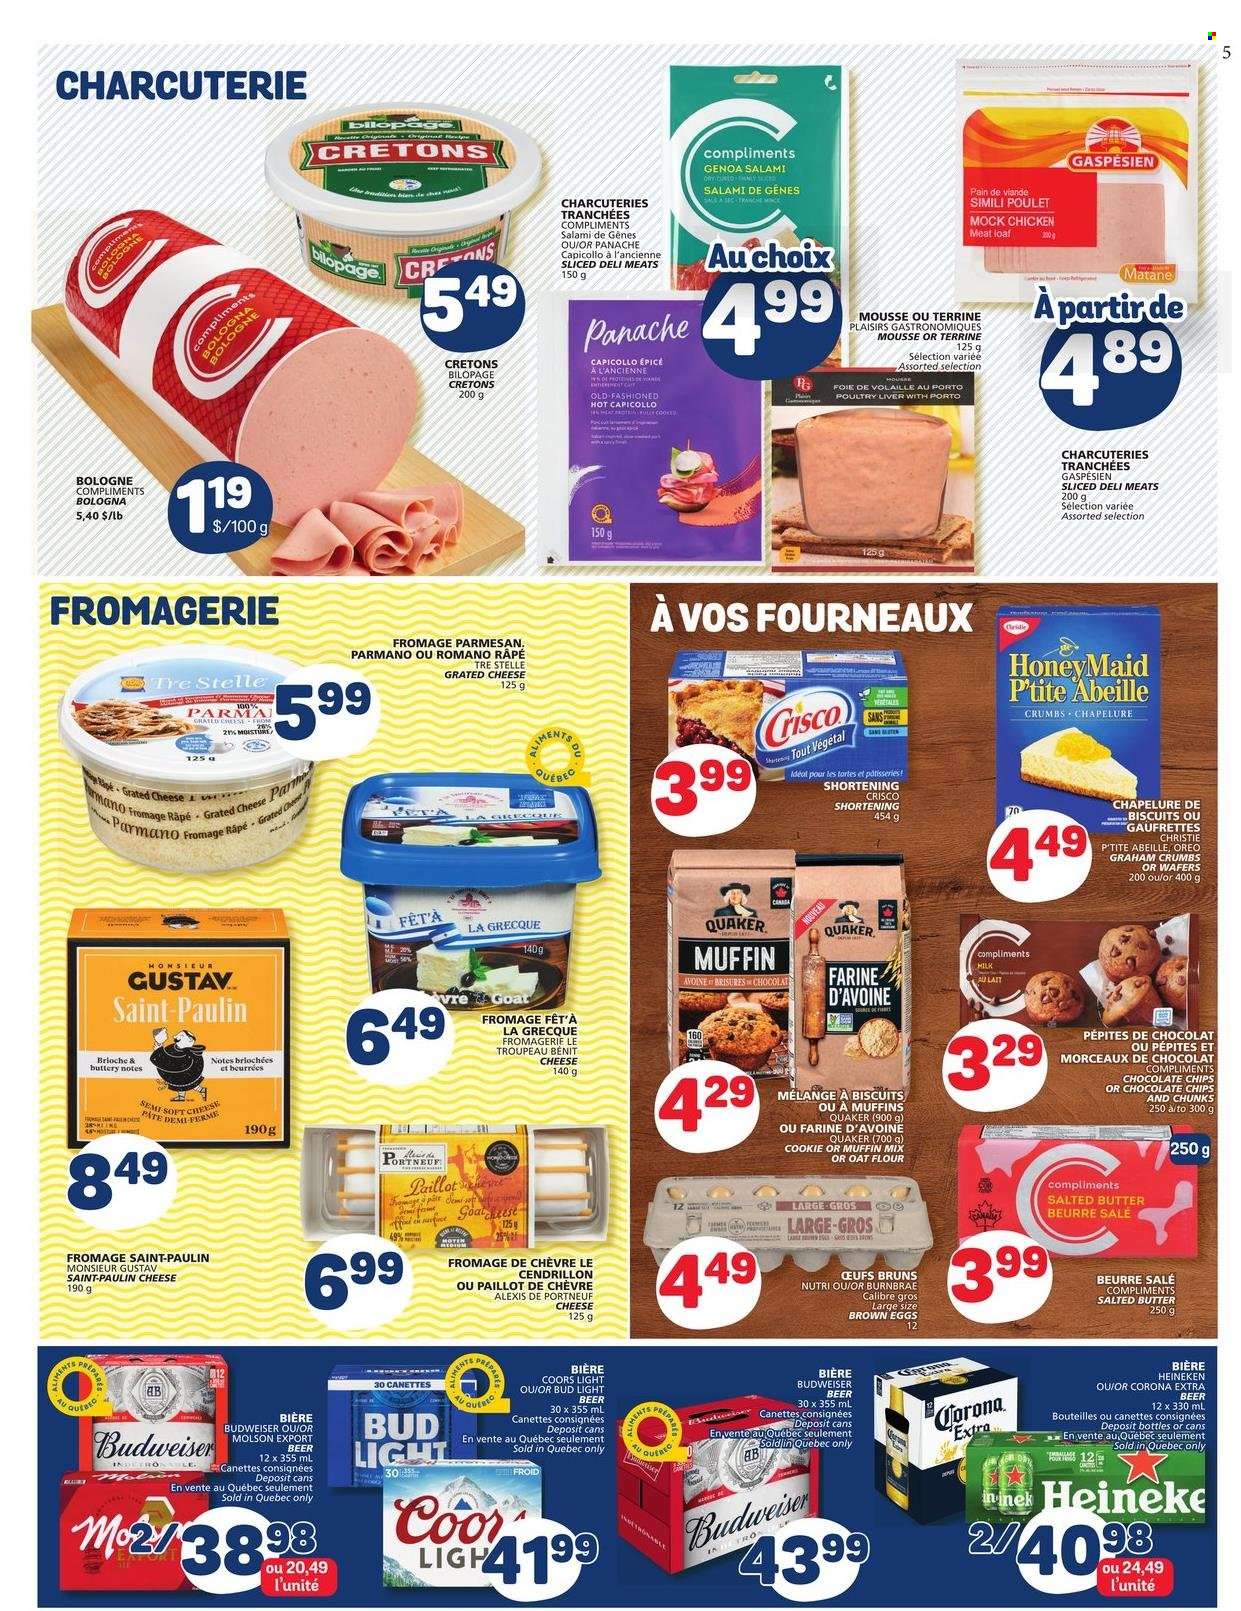 thumbnail - Marché Bonichoix Flyer - March 23, 2023 - March 29, 2023 - Sales products - brioche, muffin mix, Quaker, salami, bologna sausage, soft cheese, parmesan, grated cheese, milk, eggs, salted butter, wafers, biscuit, Crisco, flour, shortening, port wine, beer, Bud Light, Corona Extra, Heineken, chicken, Budweiser, Oreo, Coors. Page 5.